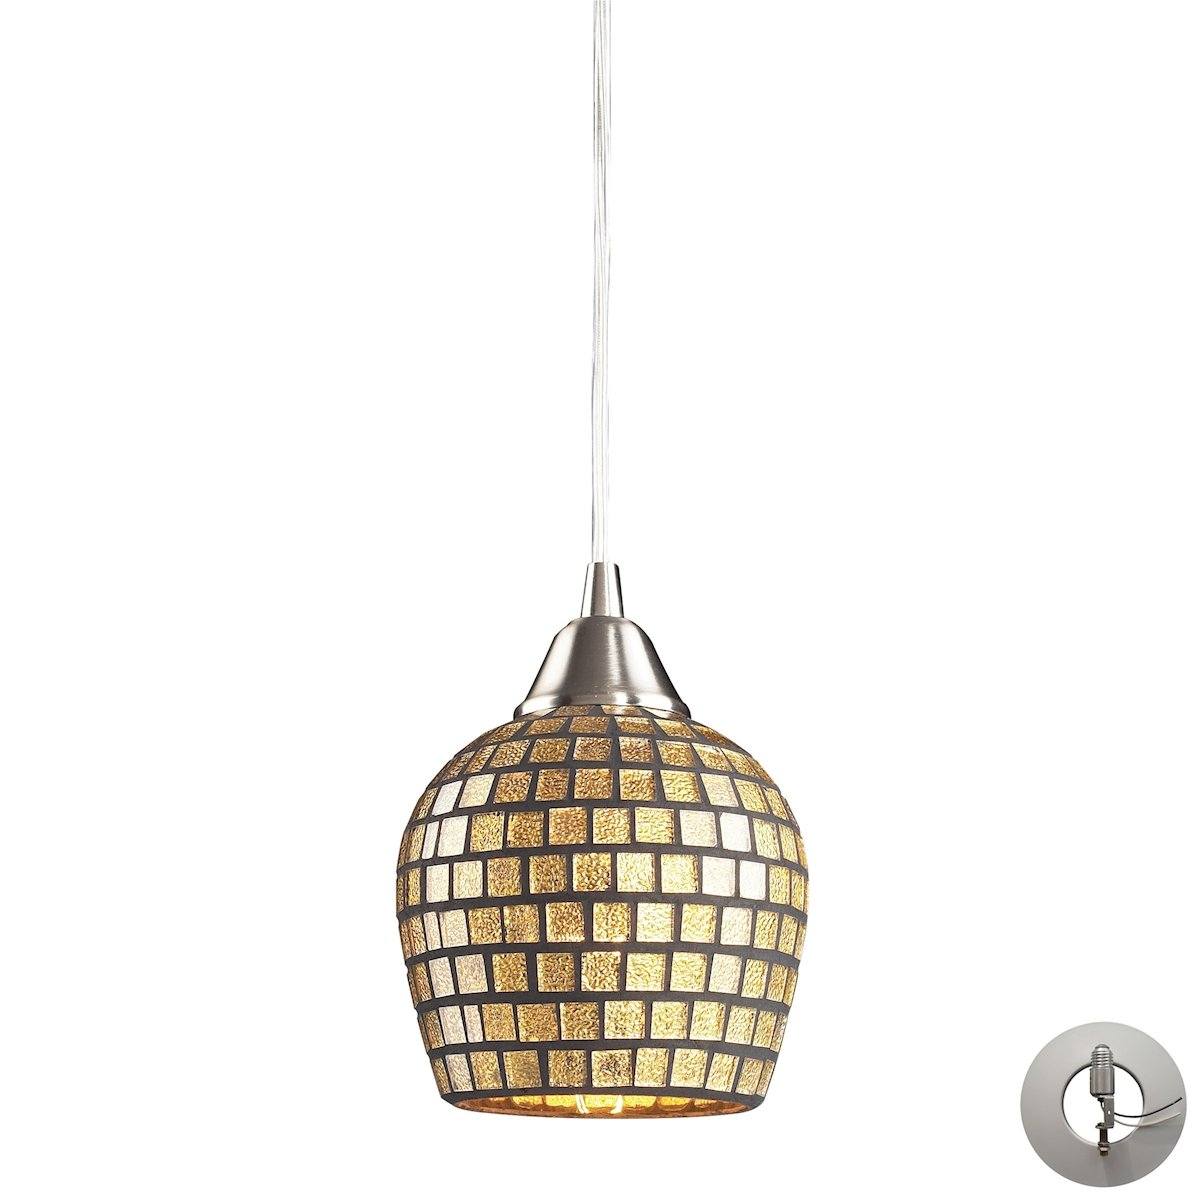 Fusion Pendant In Satin Nickel And Gold Leaf Glass - Includes Recessed Lighting Kit Ceiling Elk Lighting 